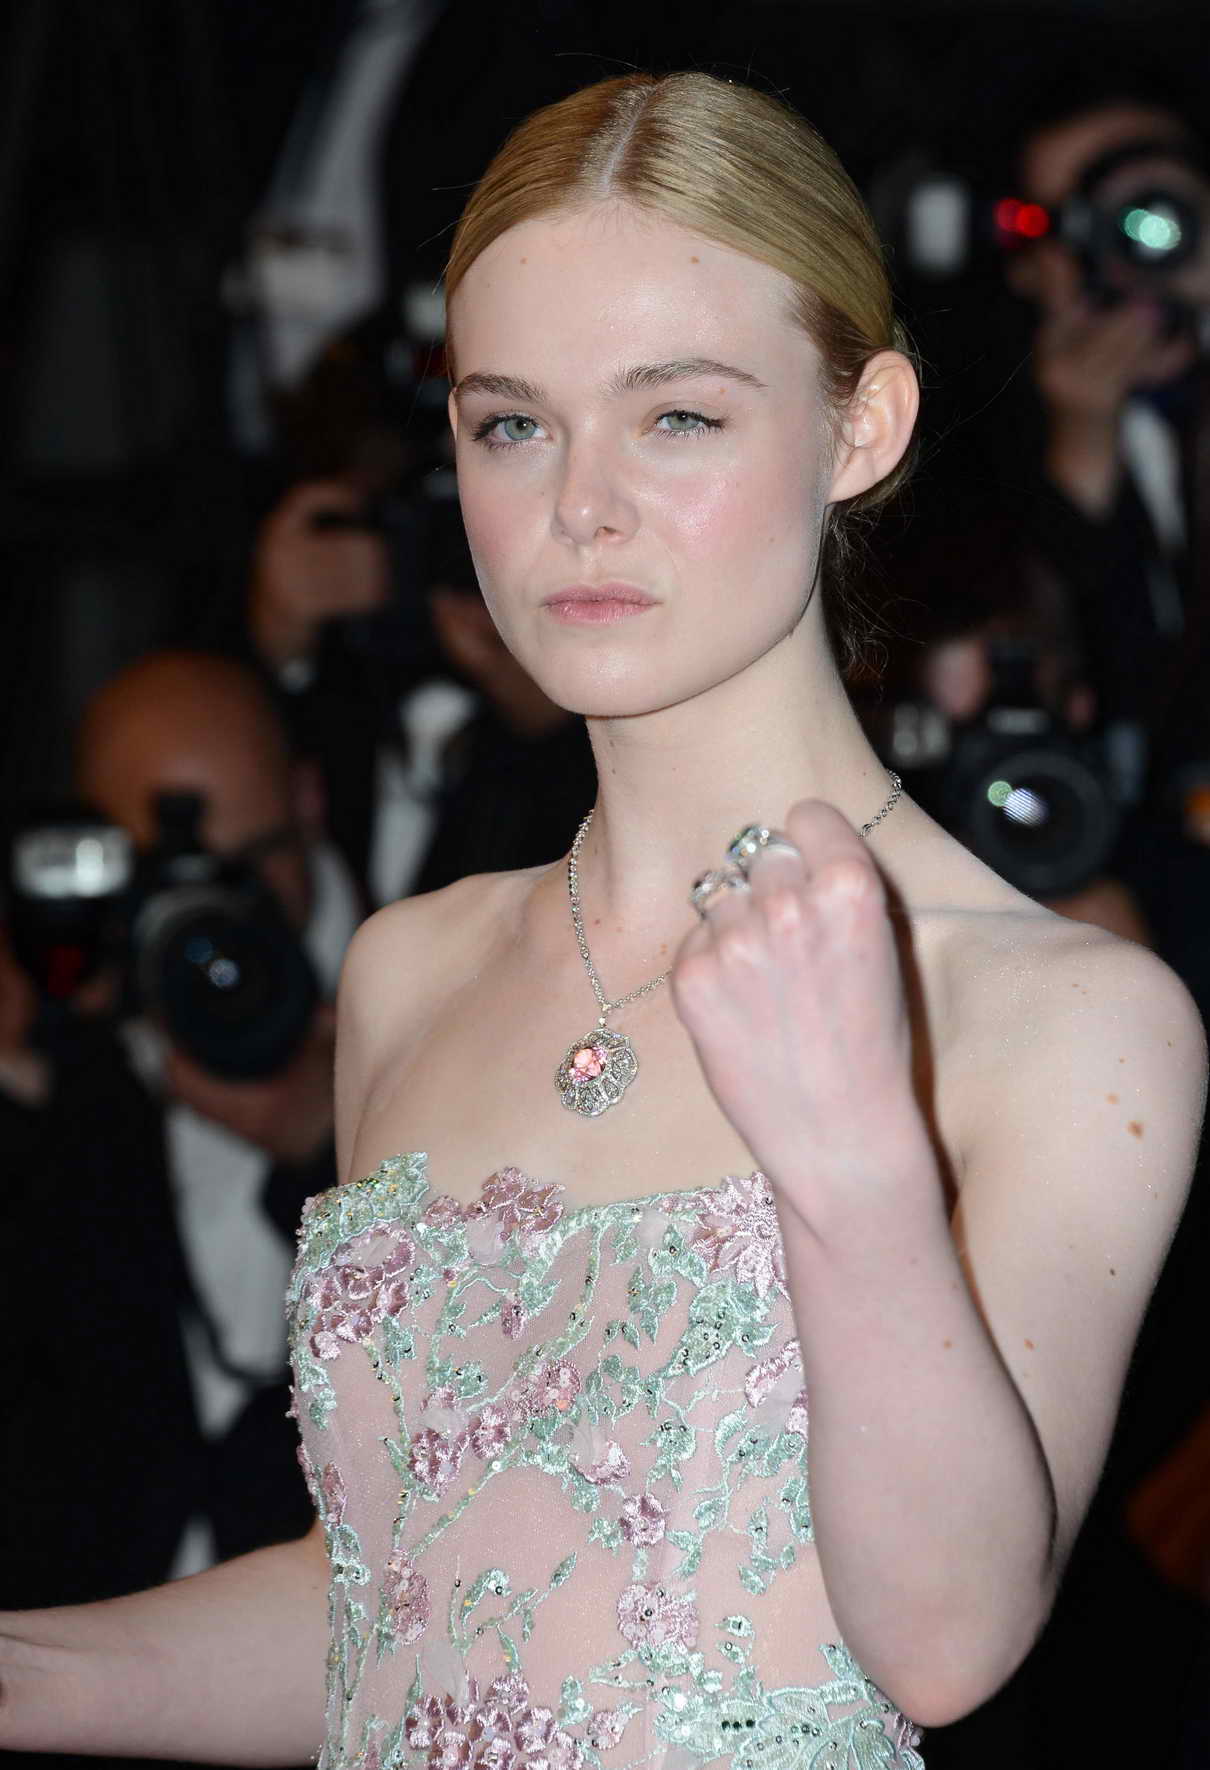 Elle Fanning At The Neon Demon Premiere During 69th Cannes Film Festival 05 20 2016 5 Lacelebs Co